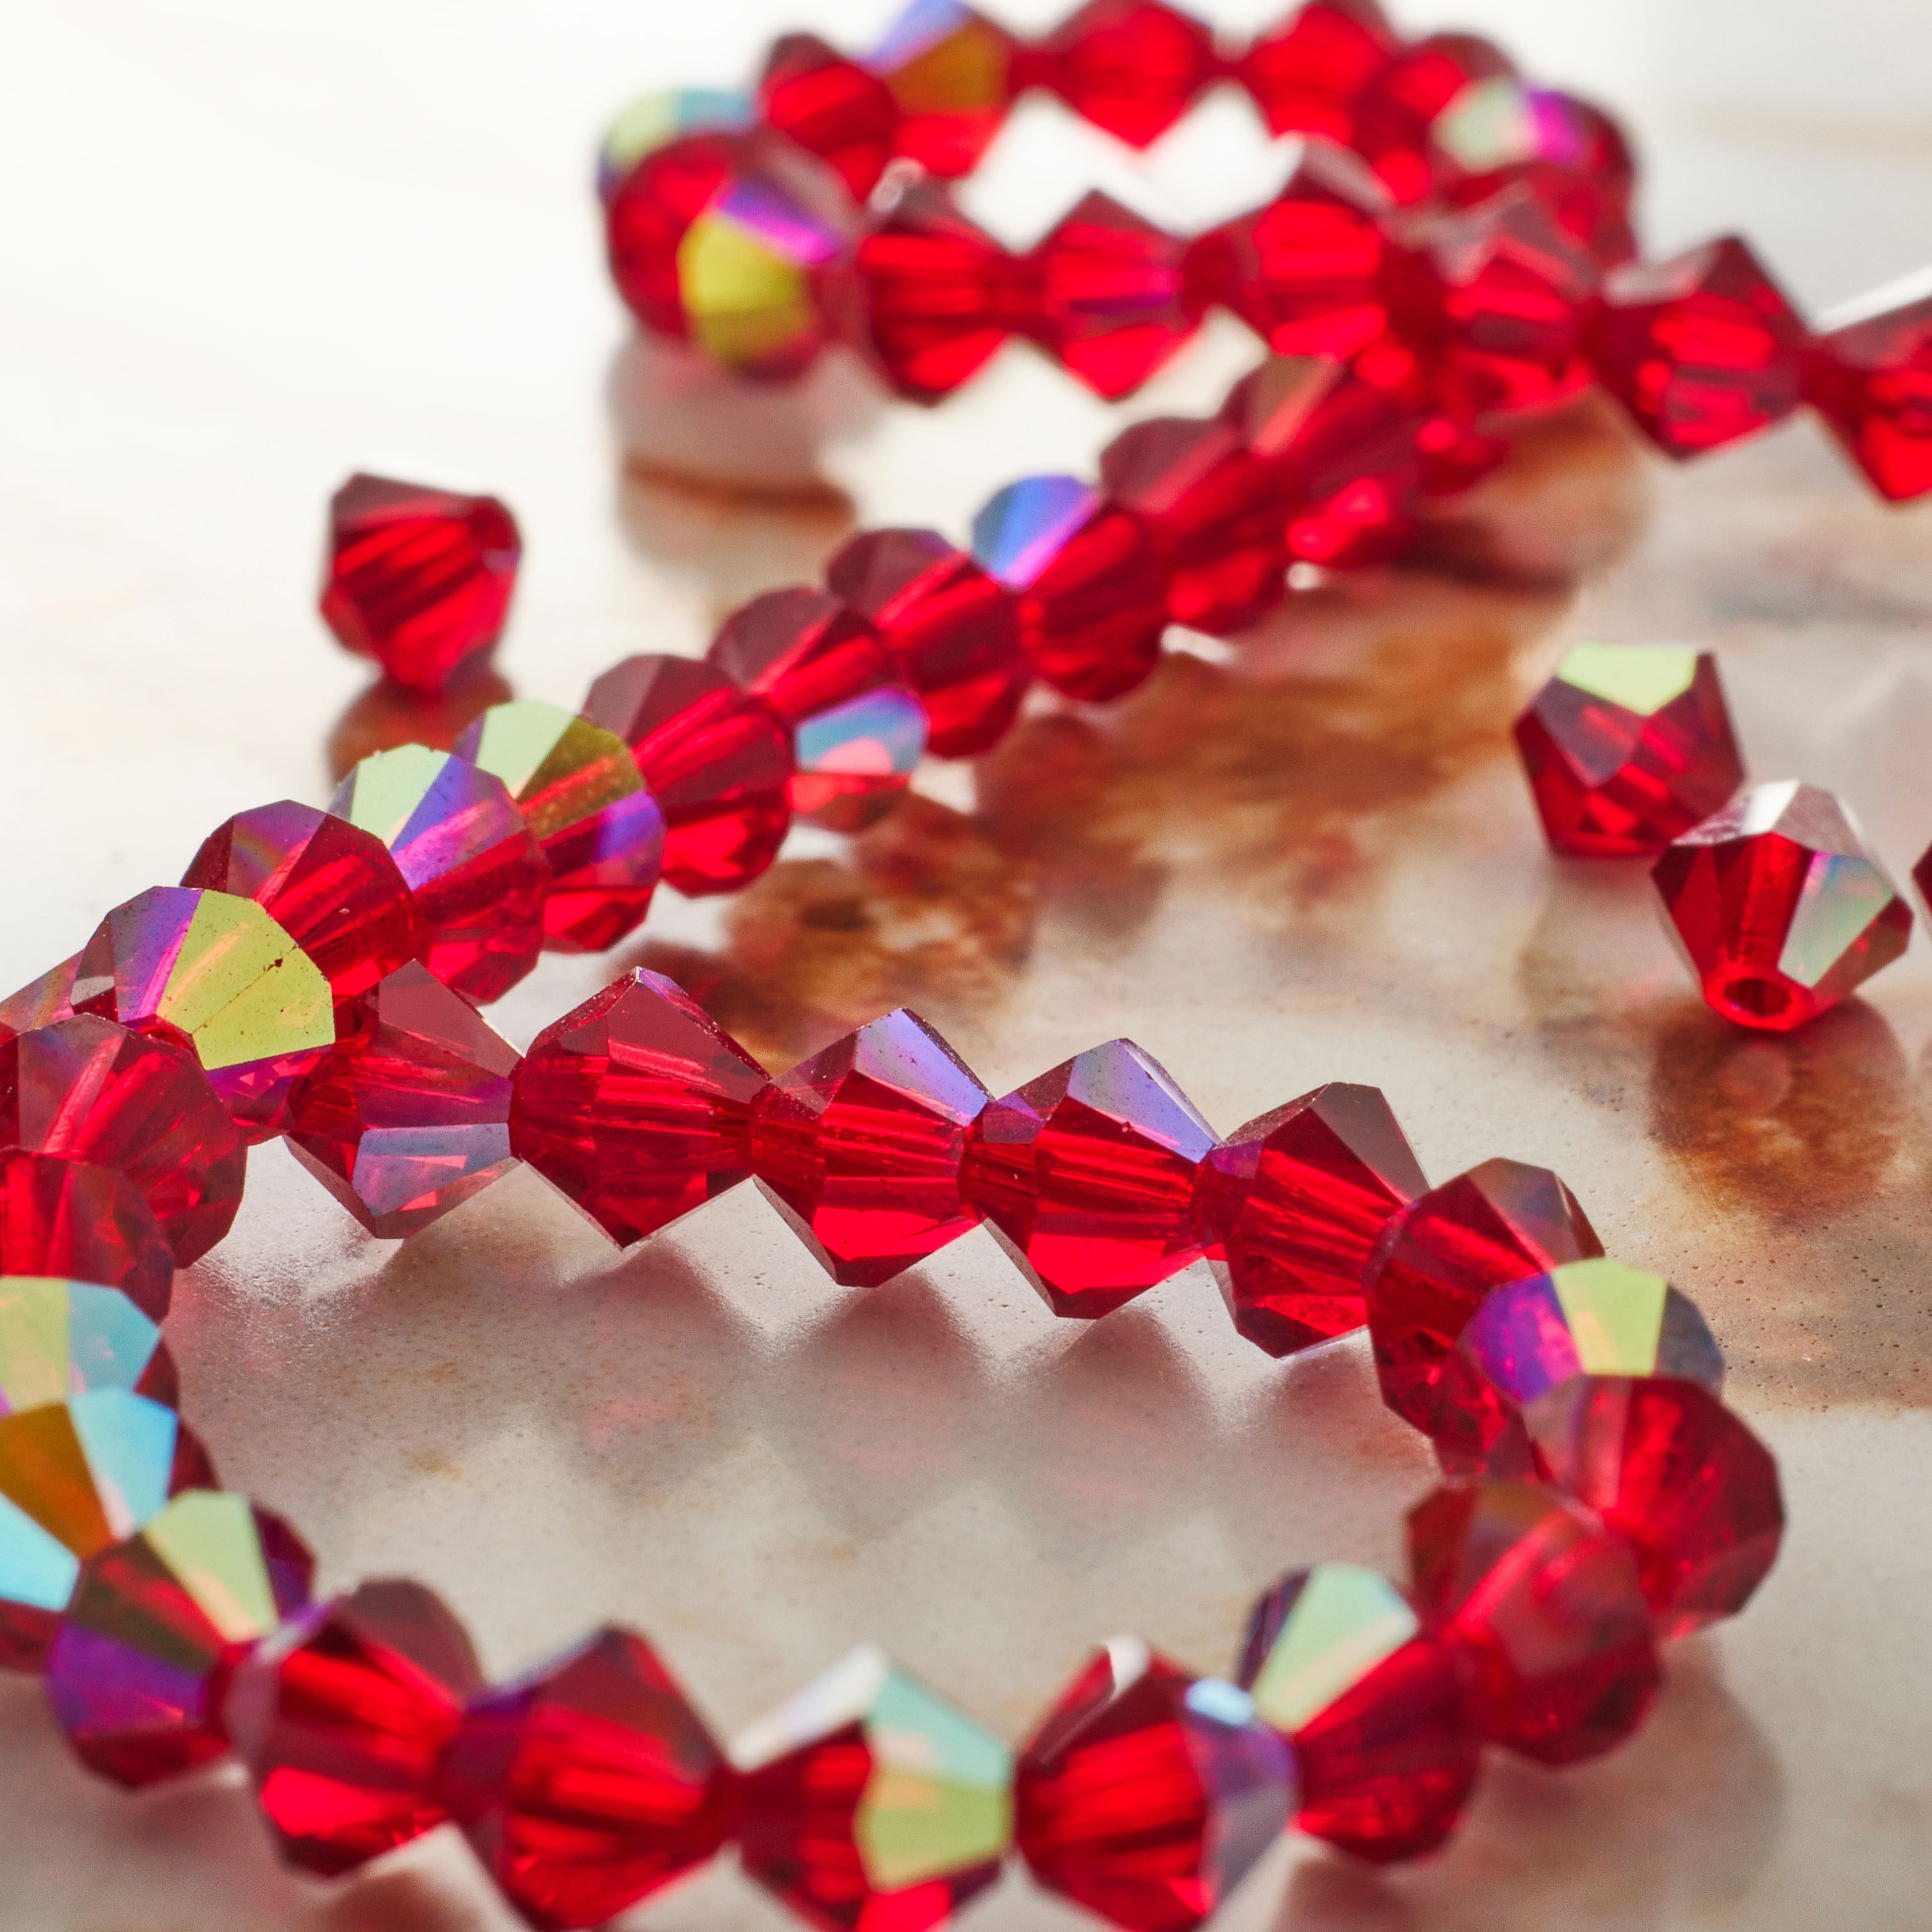 Light Siam Preciosa Crystal Czech Bicone Beads, 3mm, 4mm,Holiday Red  Crystal Beads,Bright Red Bicone Crystal Beads, Flag Red Crystal Beads